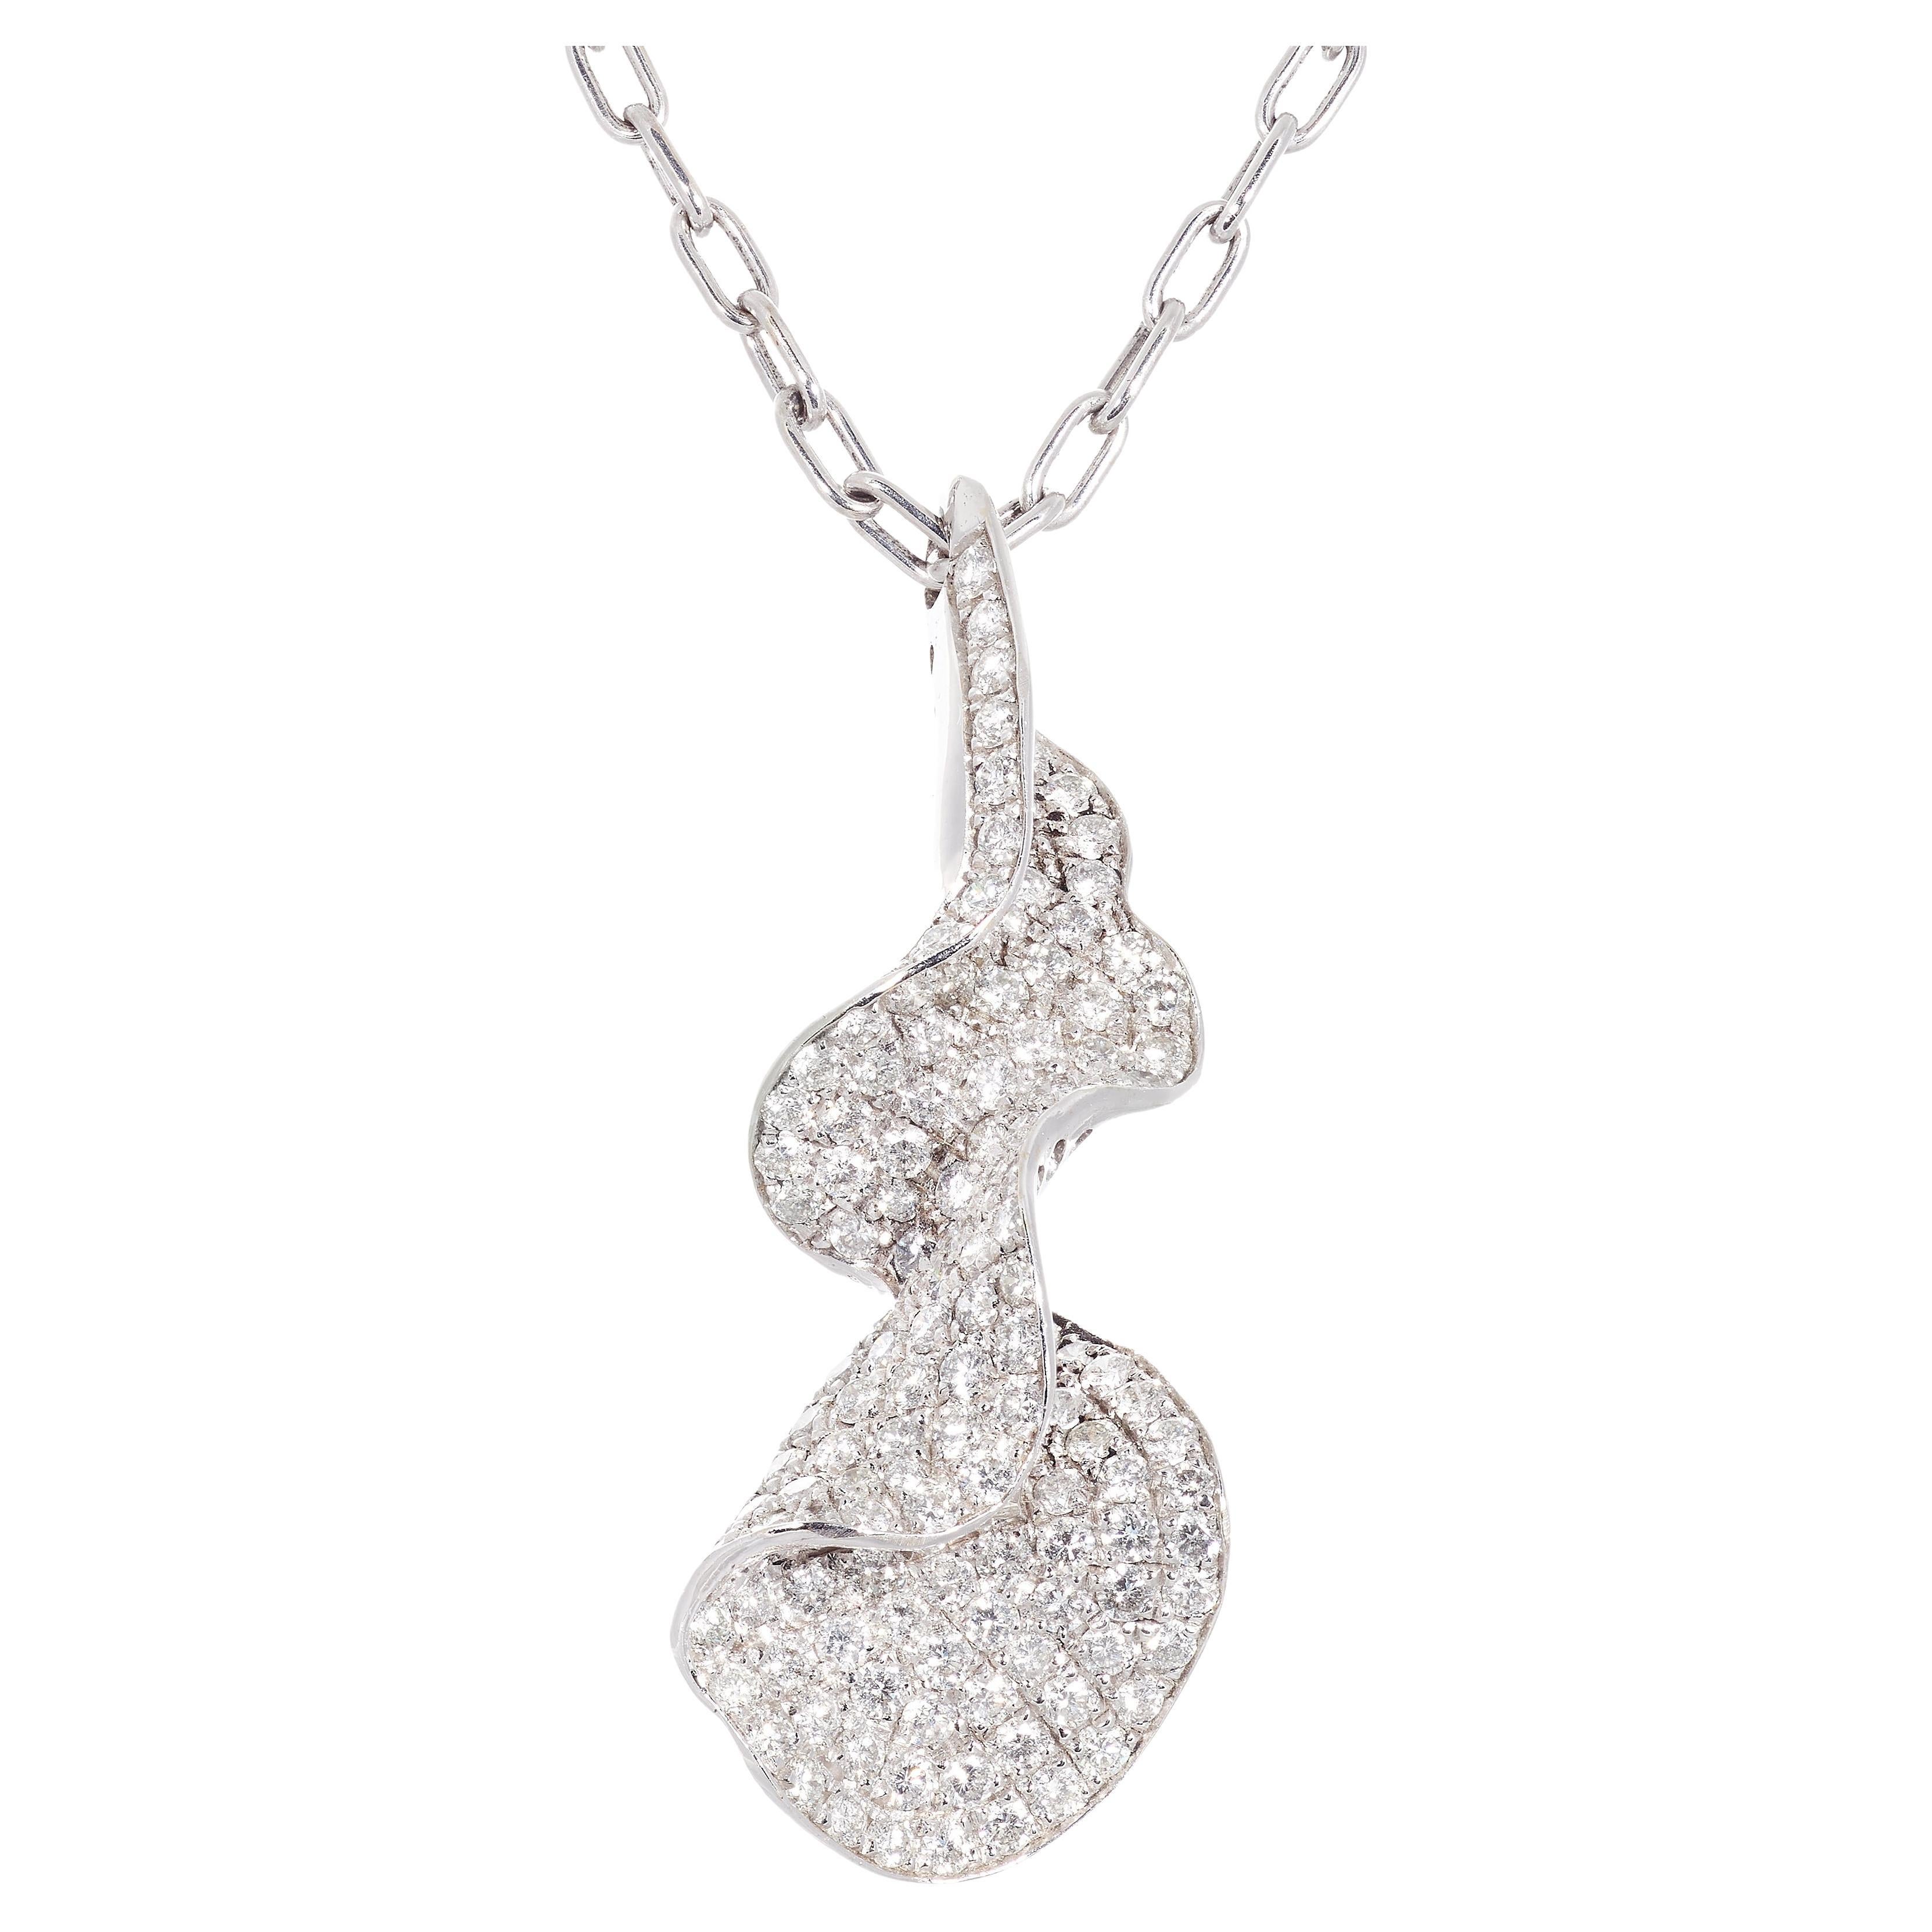 Rosior by Manuel Rosas Diamond Pendant Necklace set in White Gold 